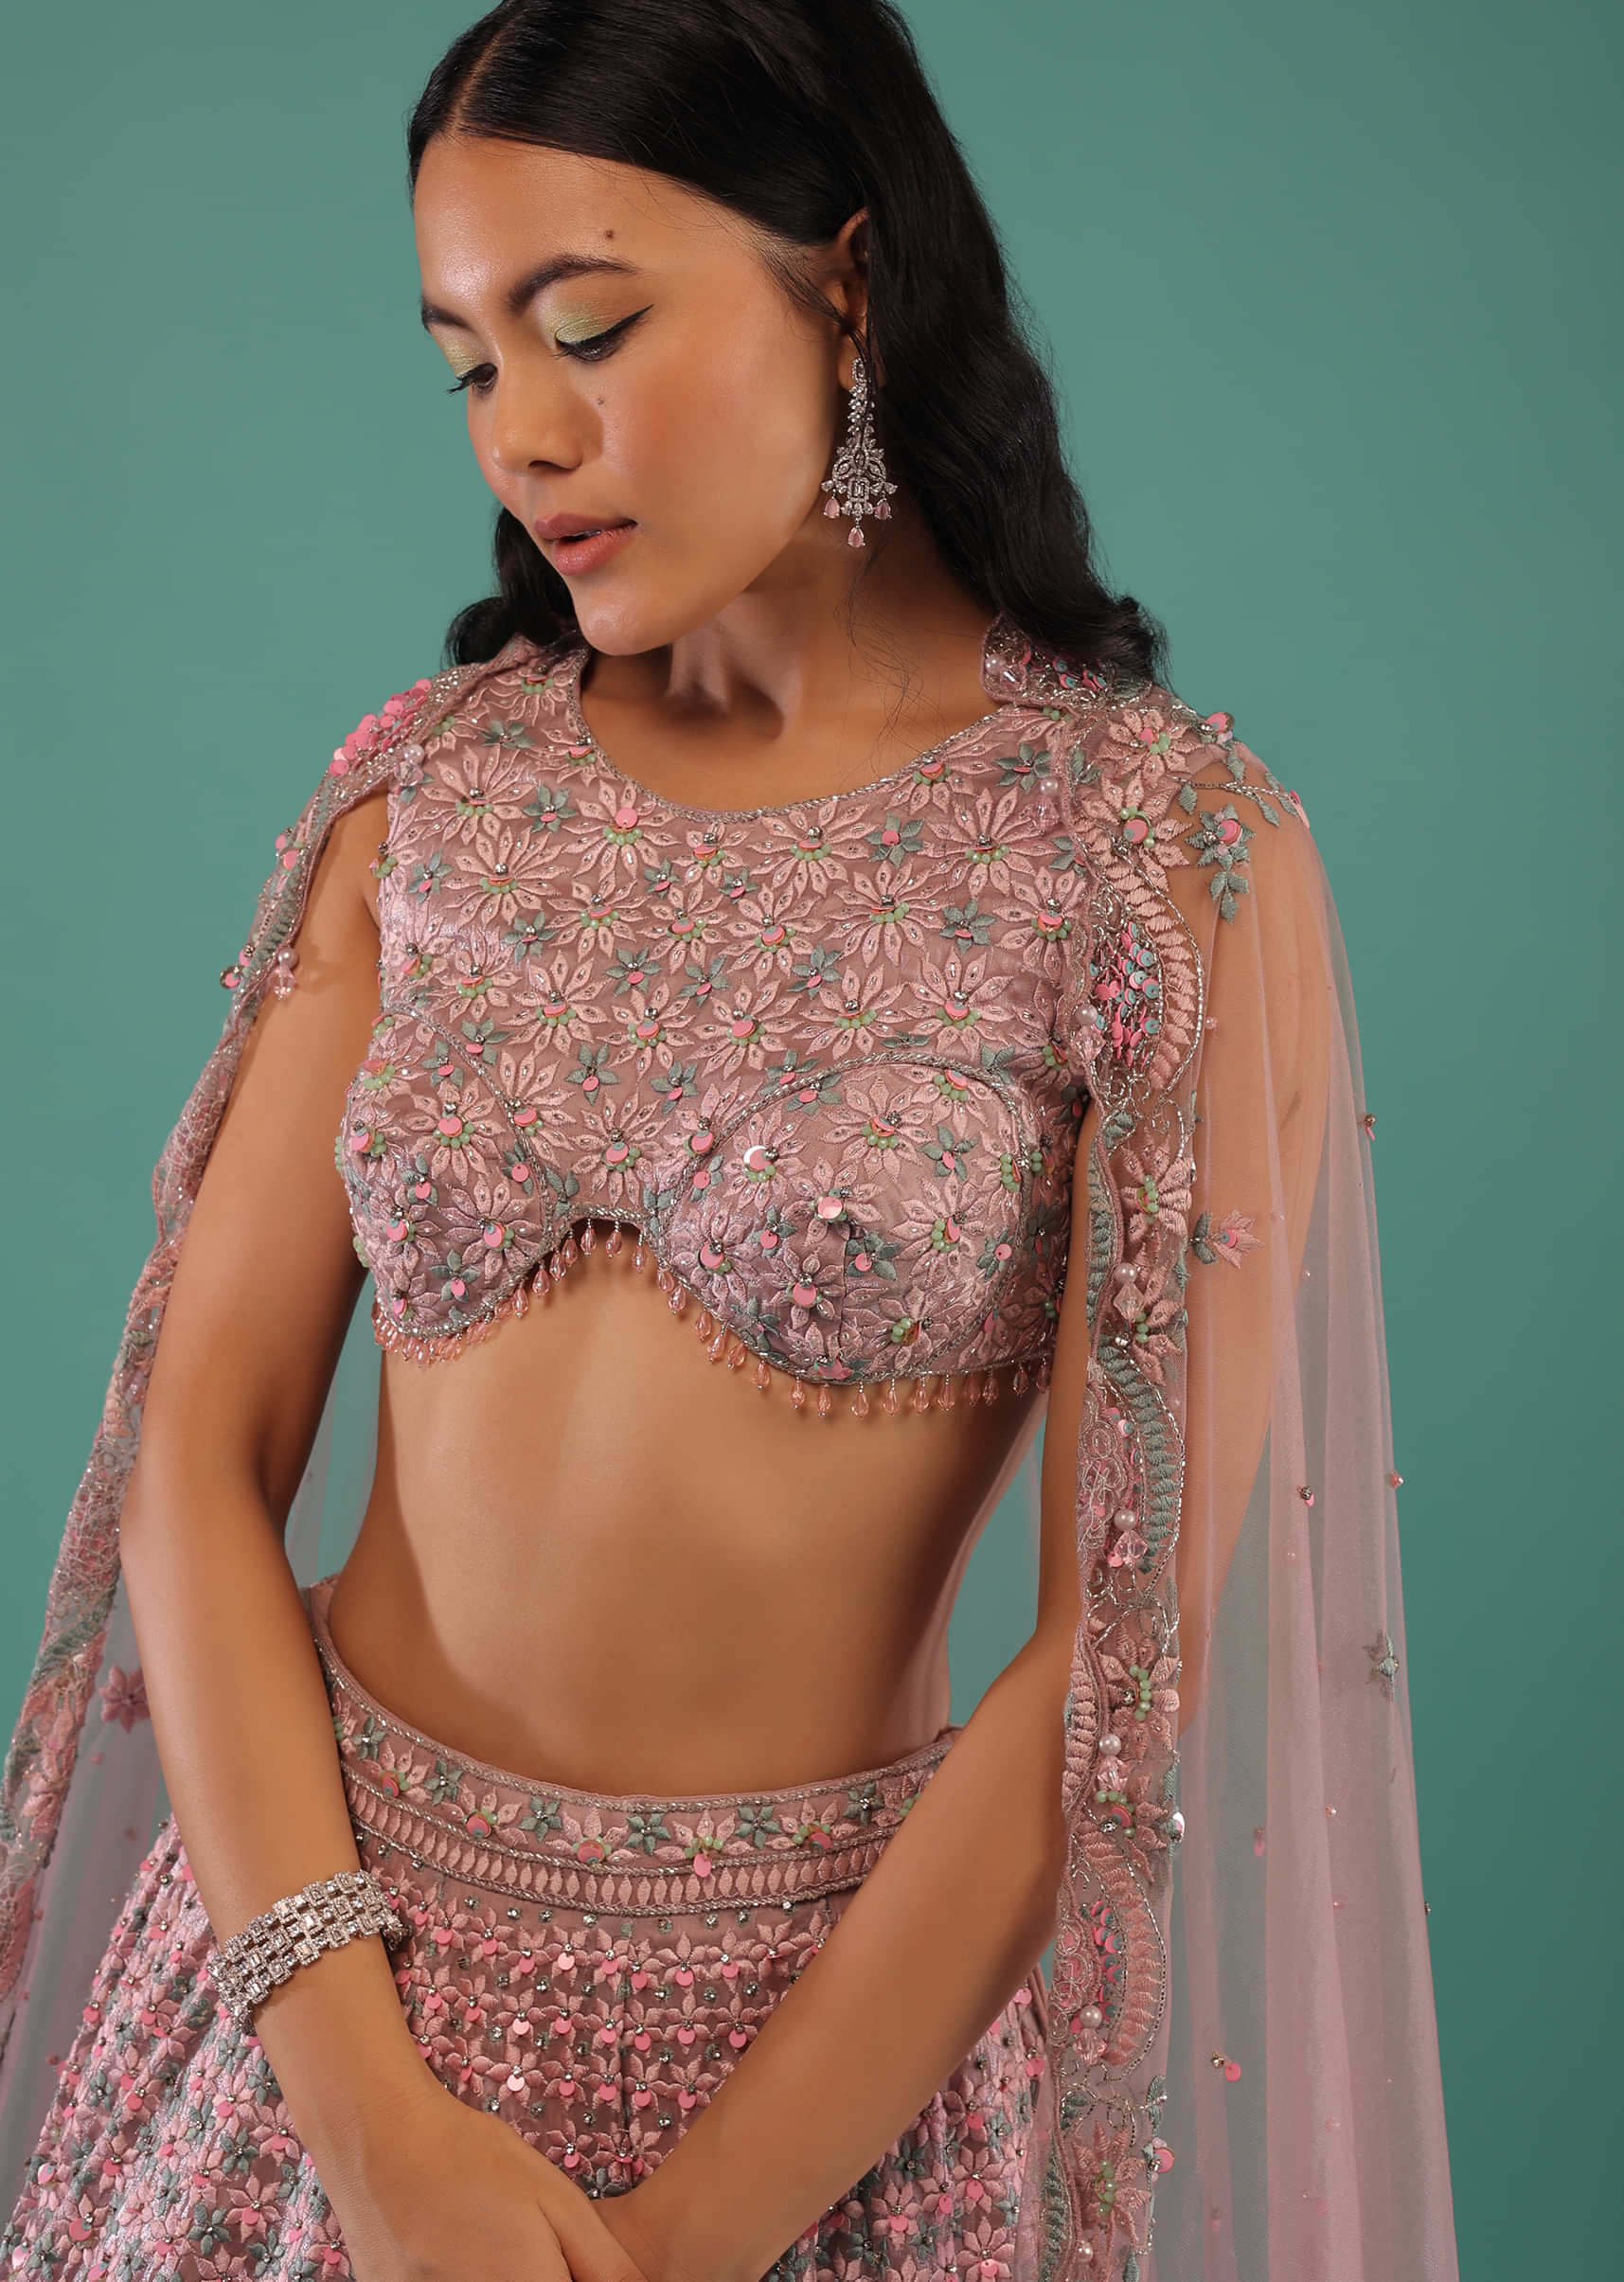 Onion Pink Organza Lehenga And Crop Top With Multi Colored Resham Embroidered Flowers And A Designer In-Cut Hemline